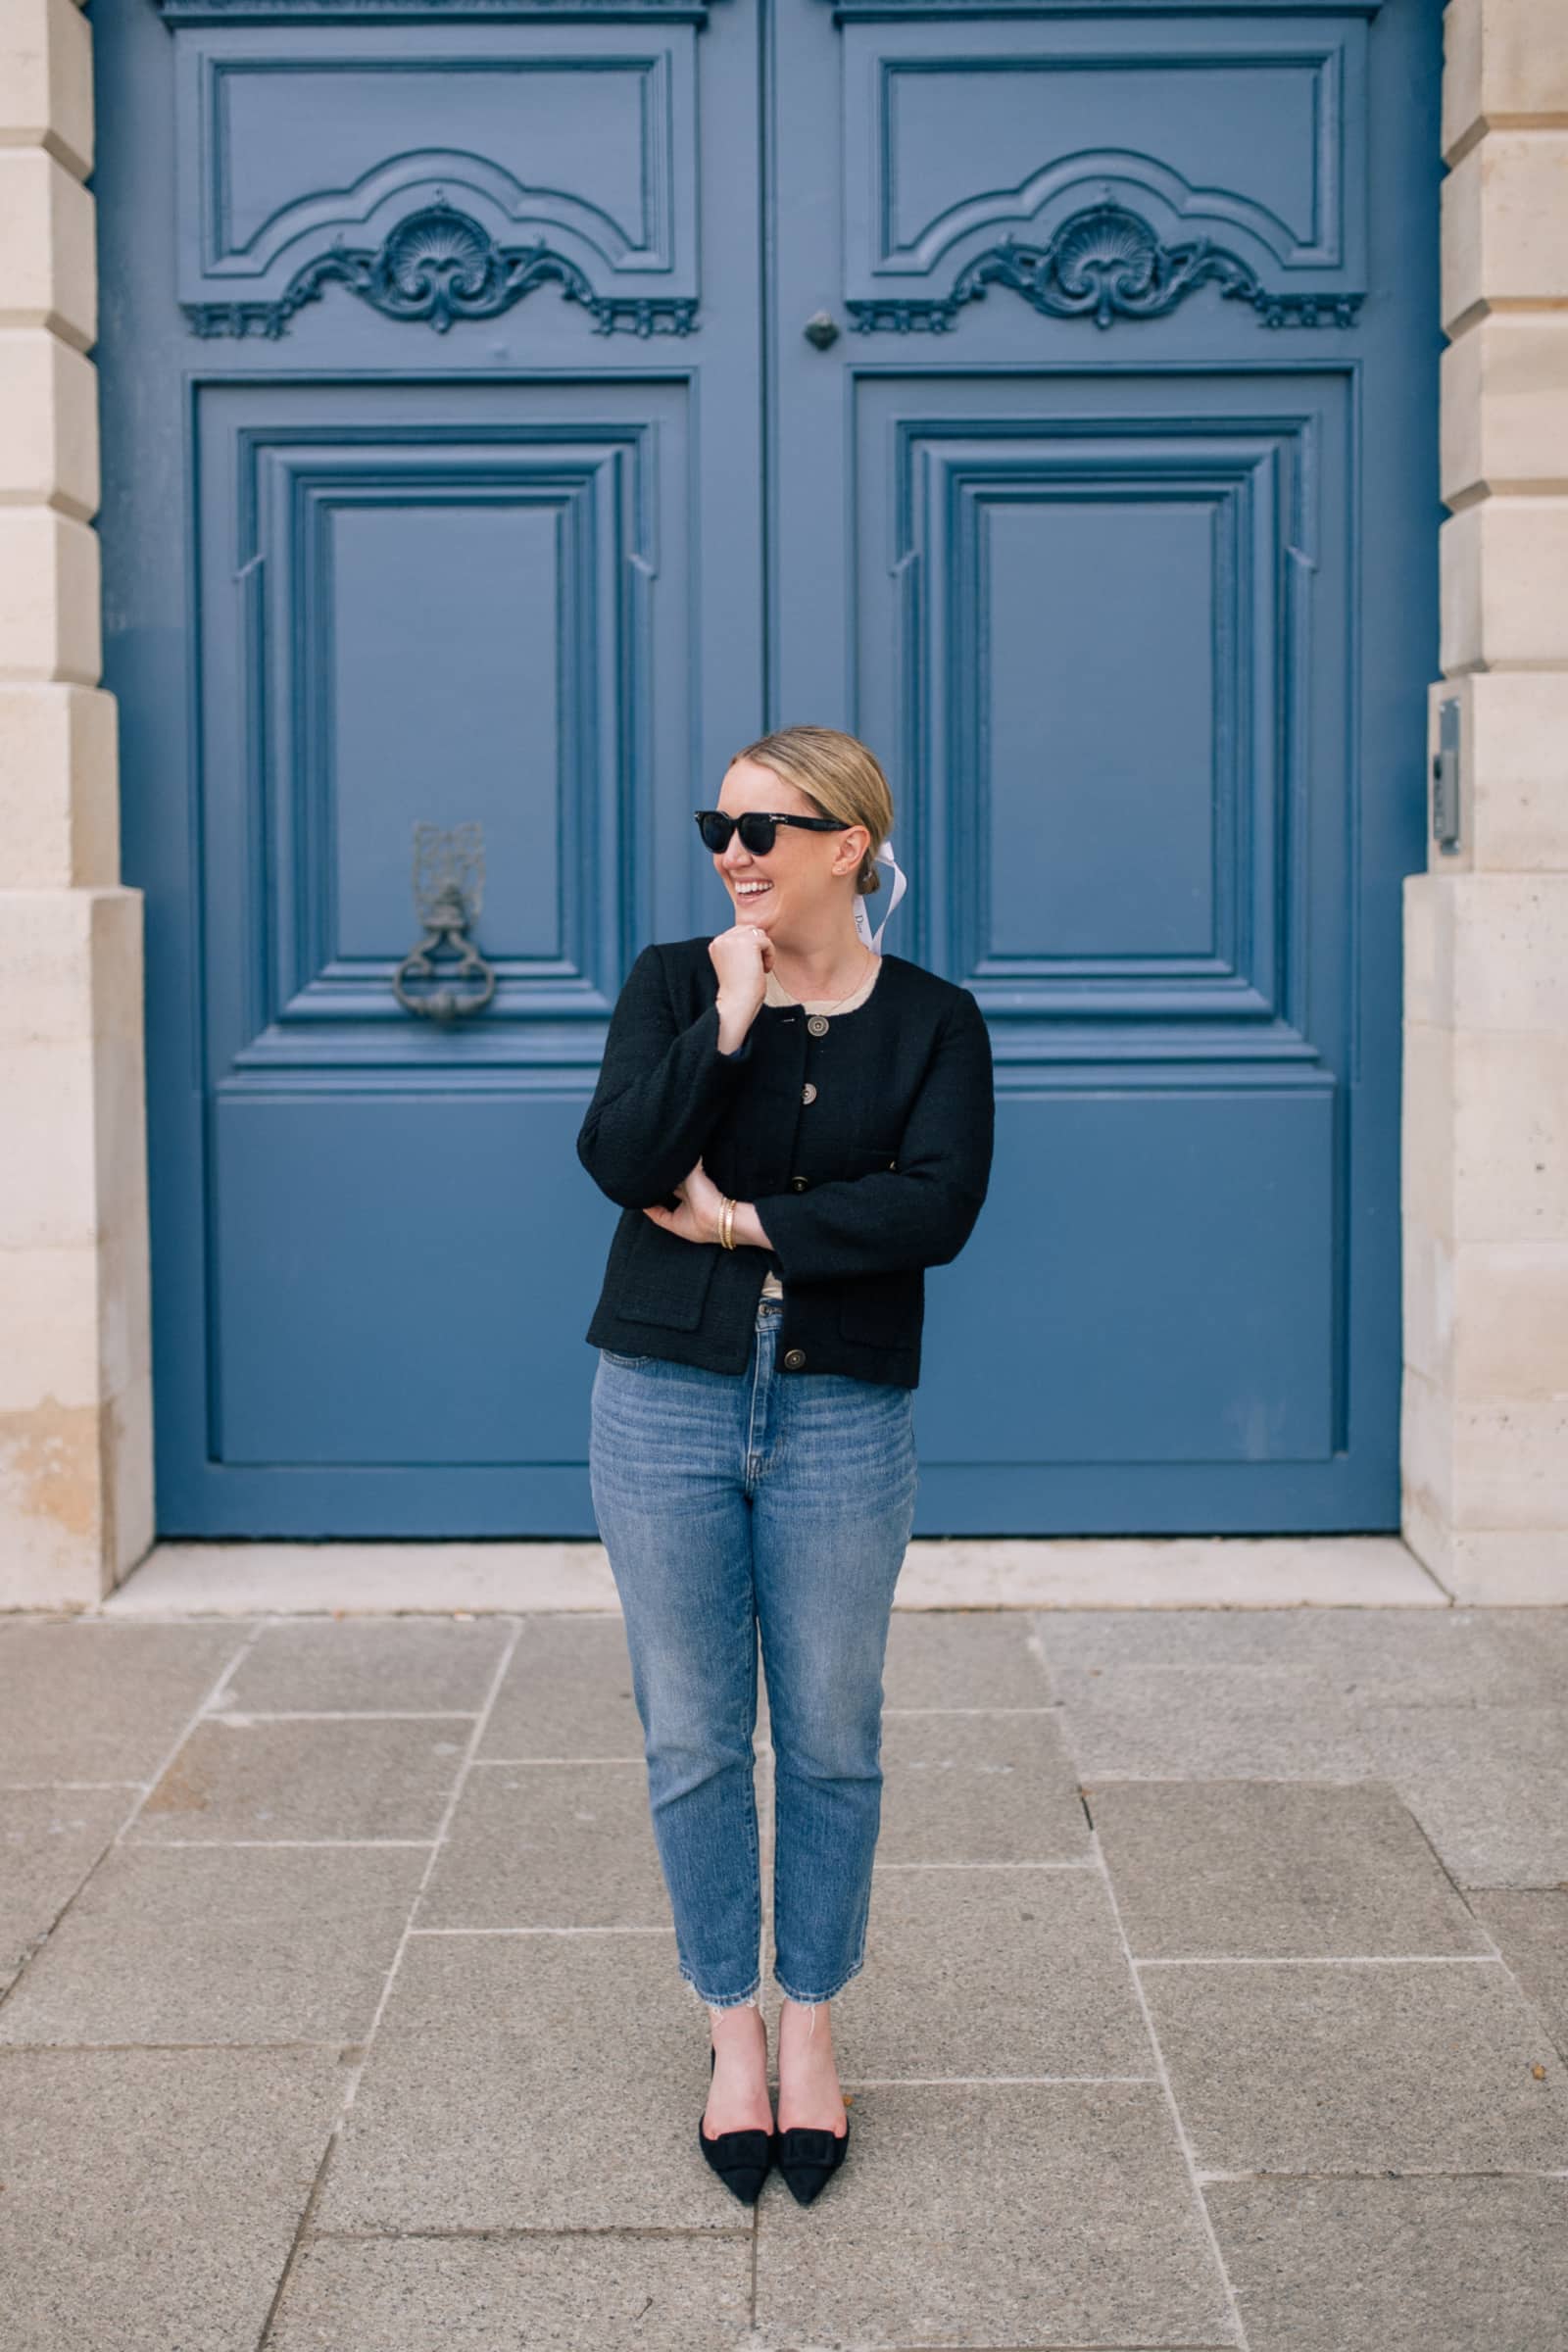 J.Crew Lady Jacket Fall Outfit | Coats to Wear in Paris